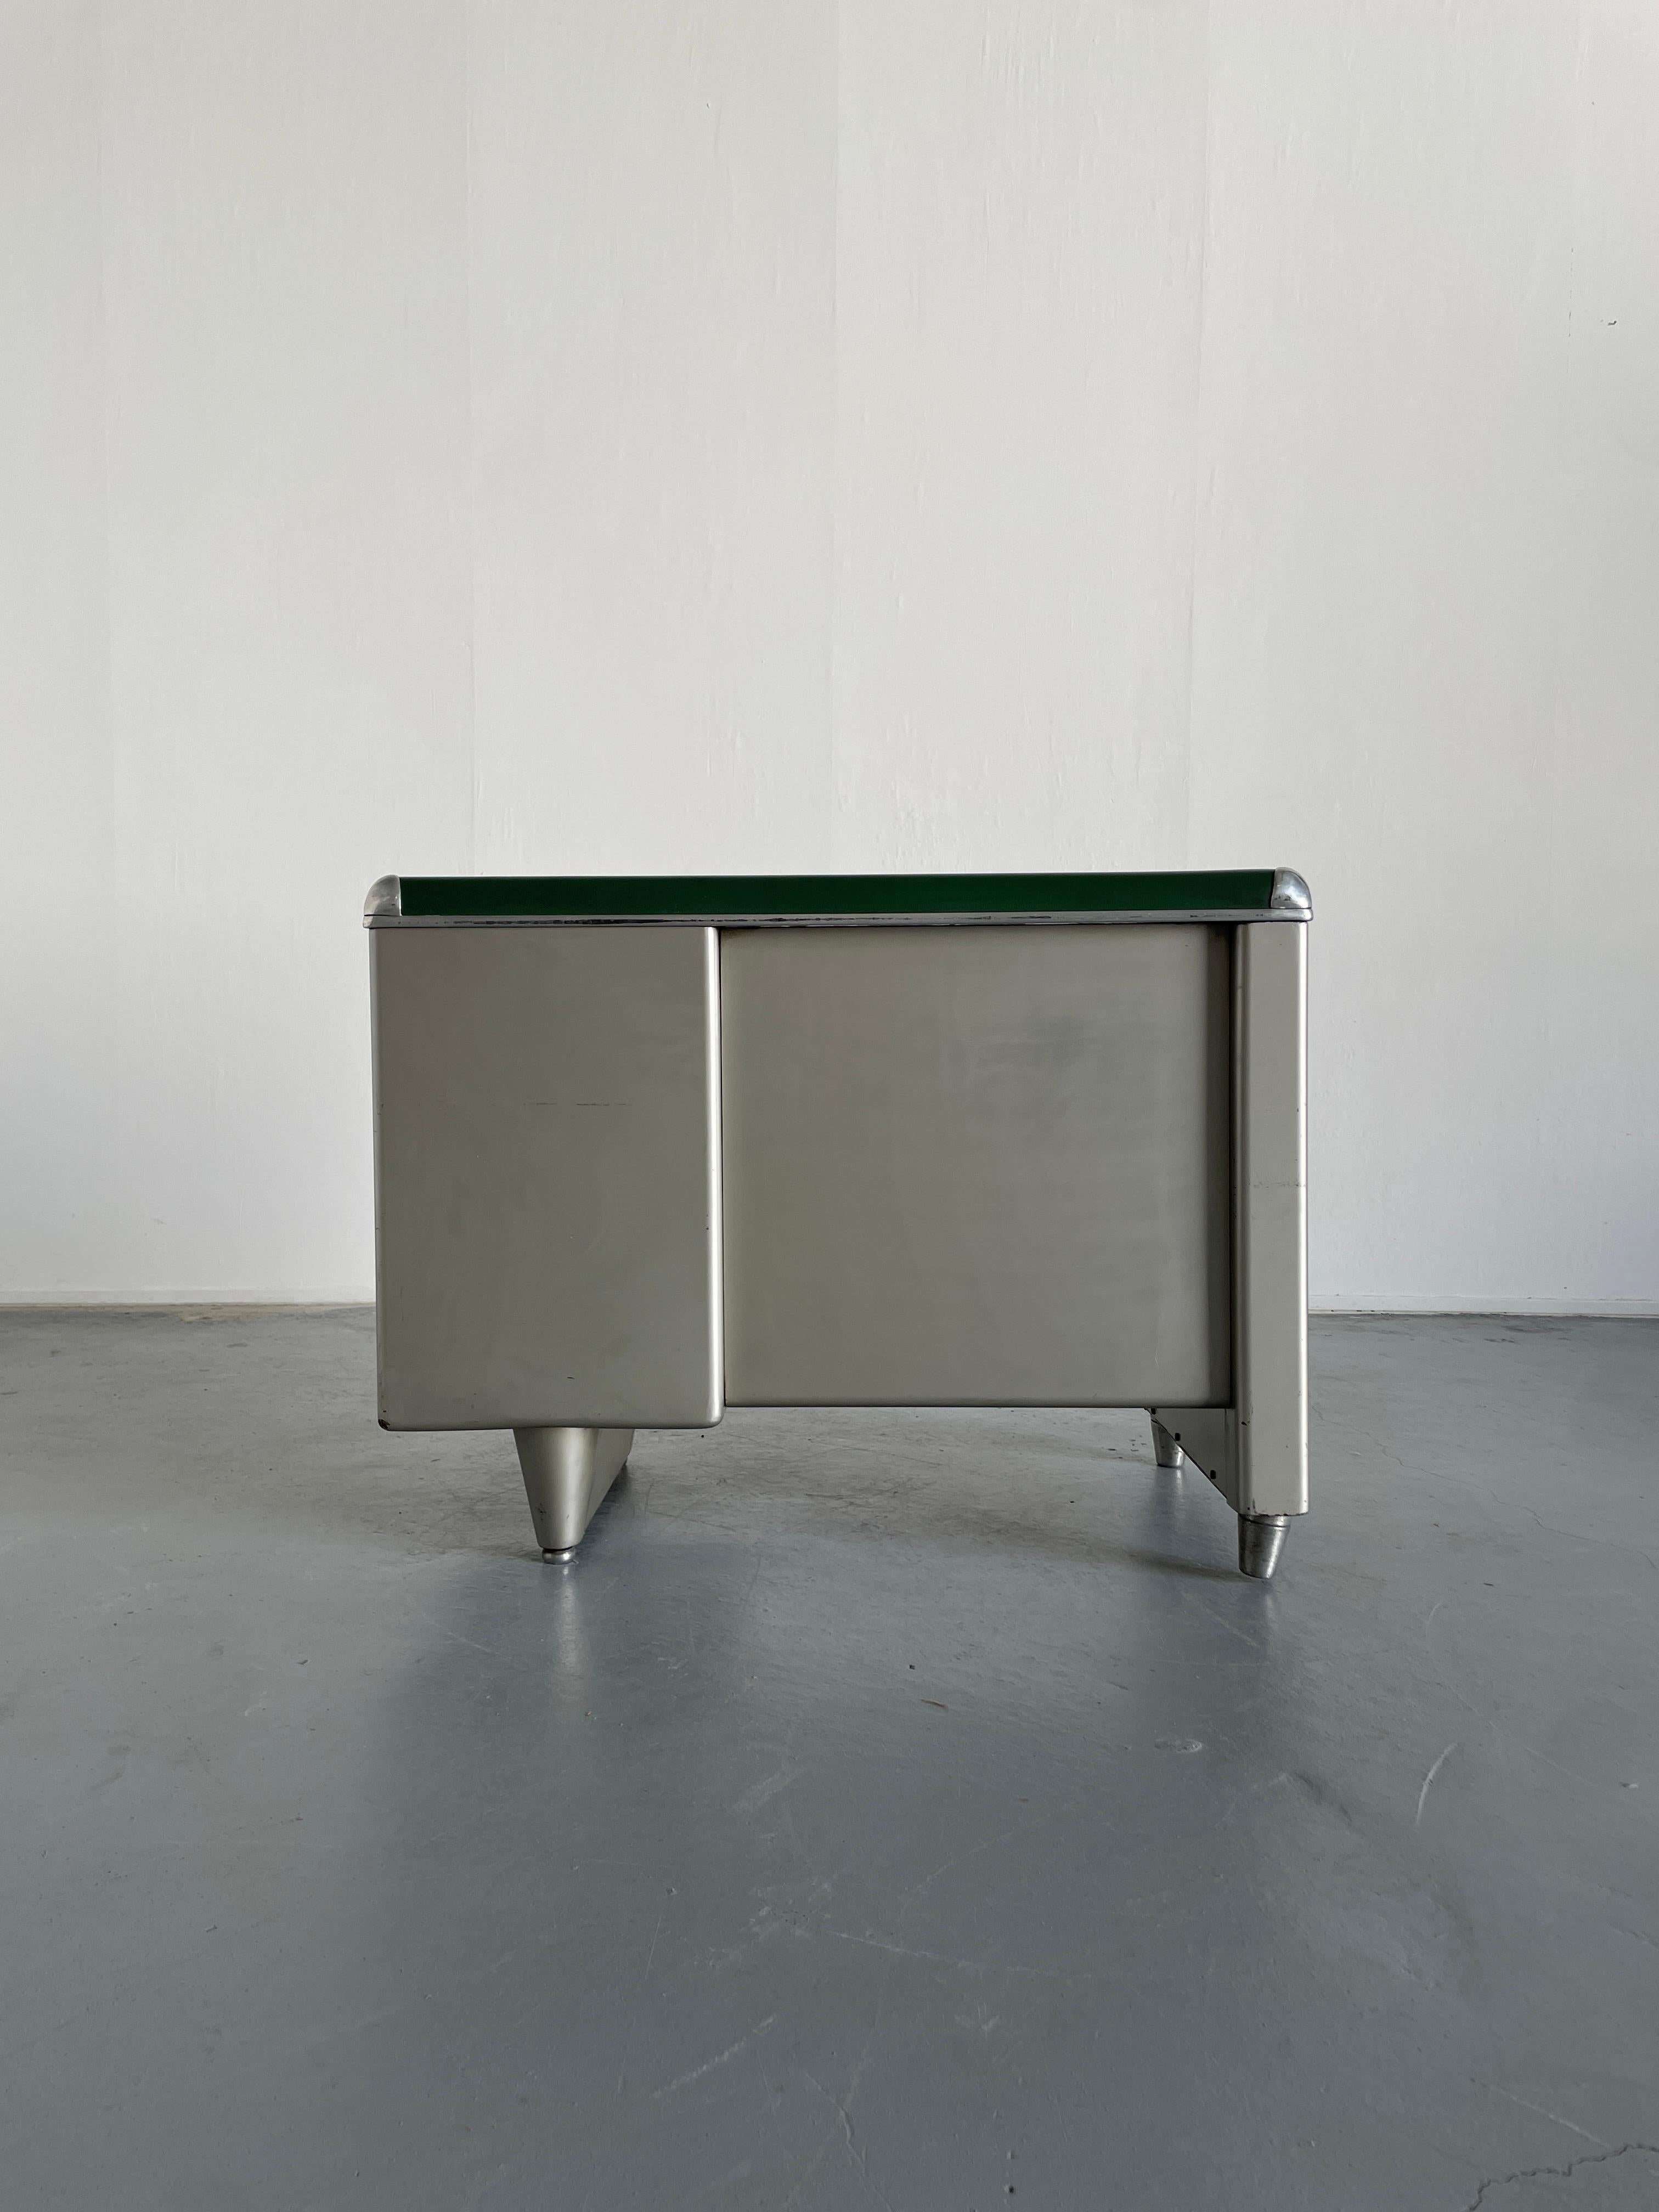 Mid-20th Century 1950s Industrial Single Bank Steel Tanker Desk by Orma Milano, Italy For Sale